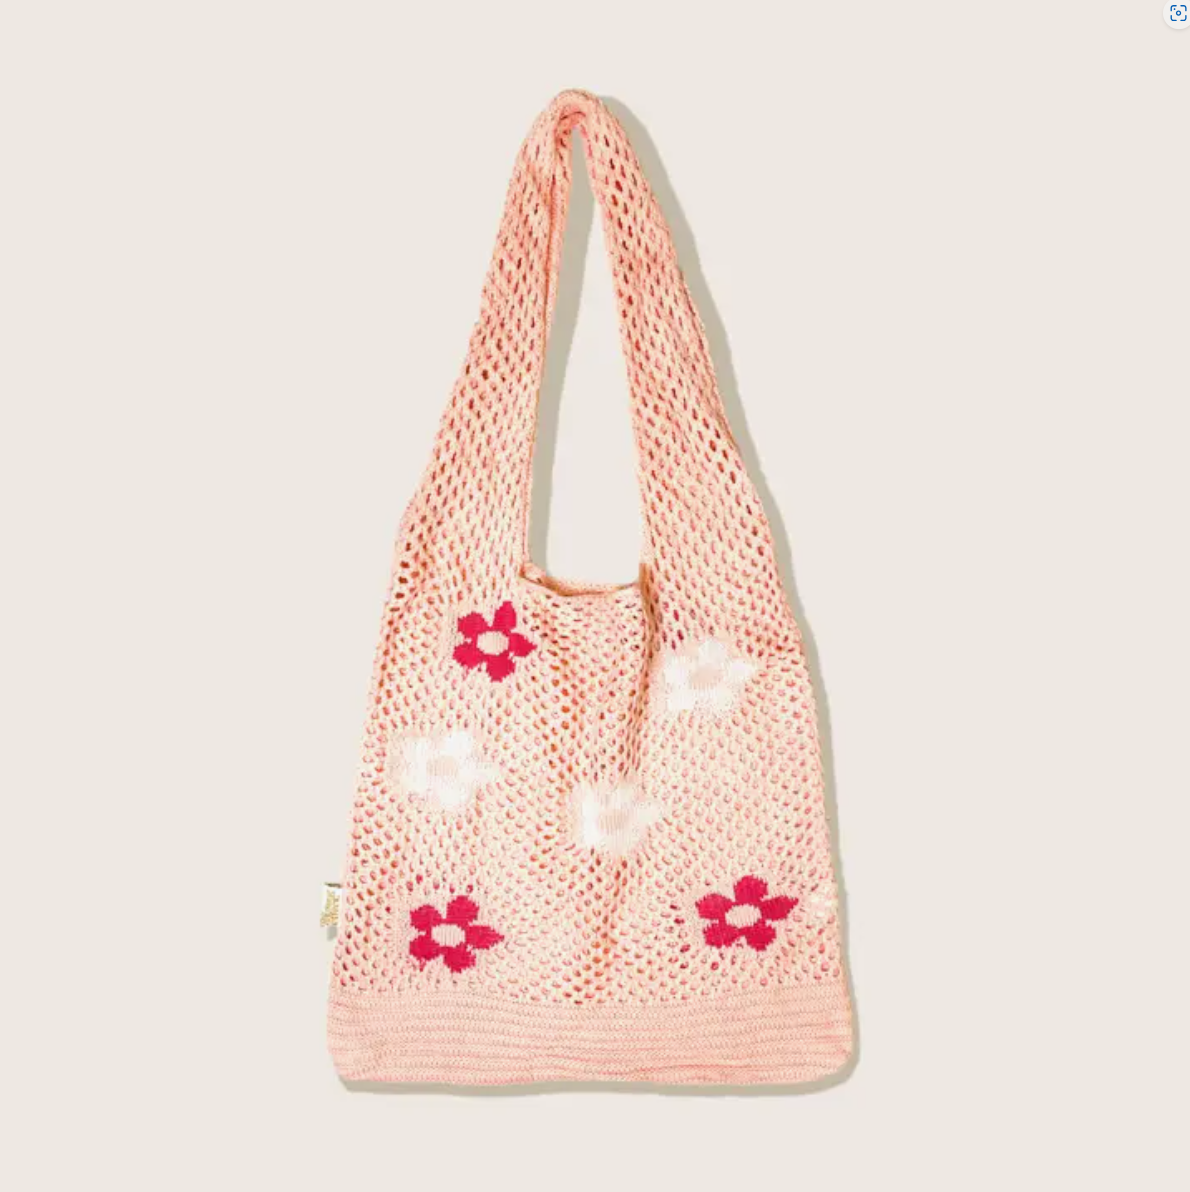 Daisy Mae Bag in Hot Pink